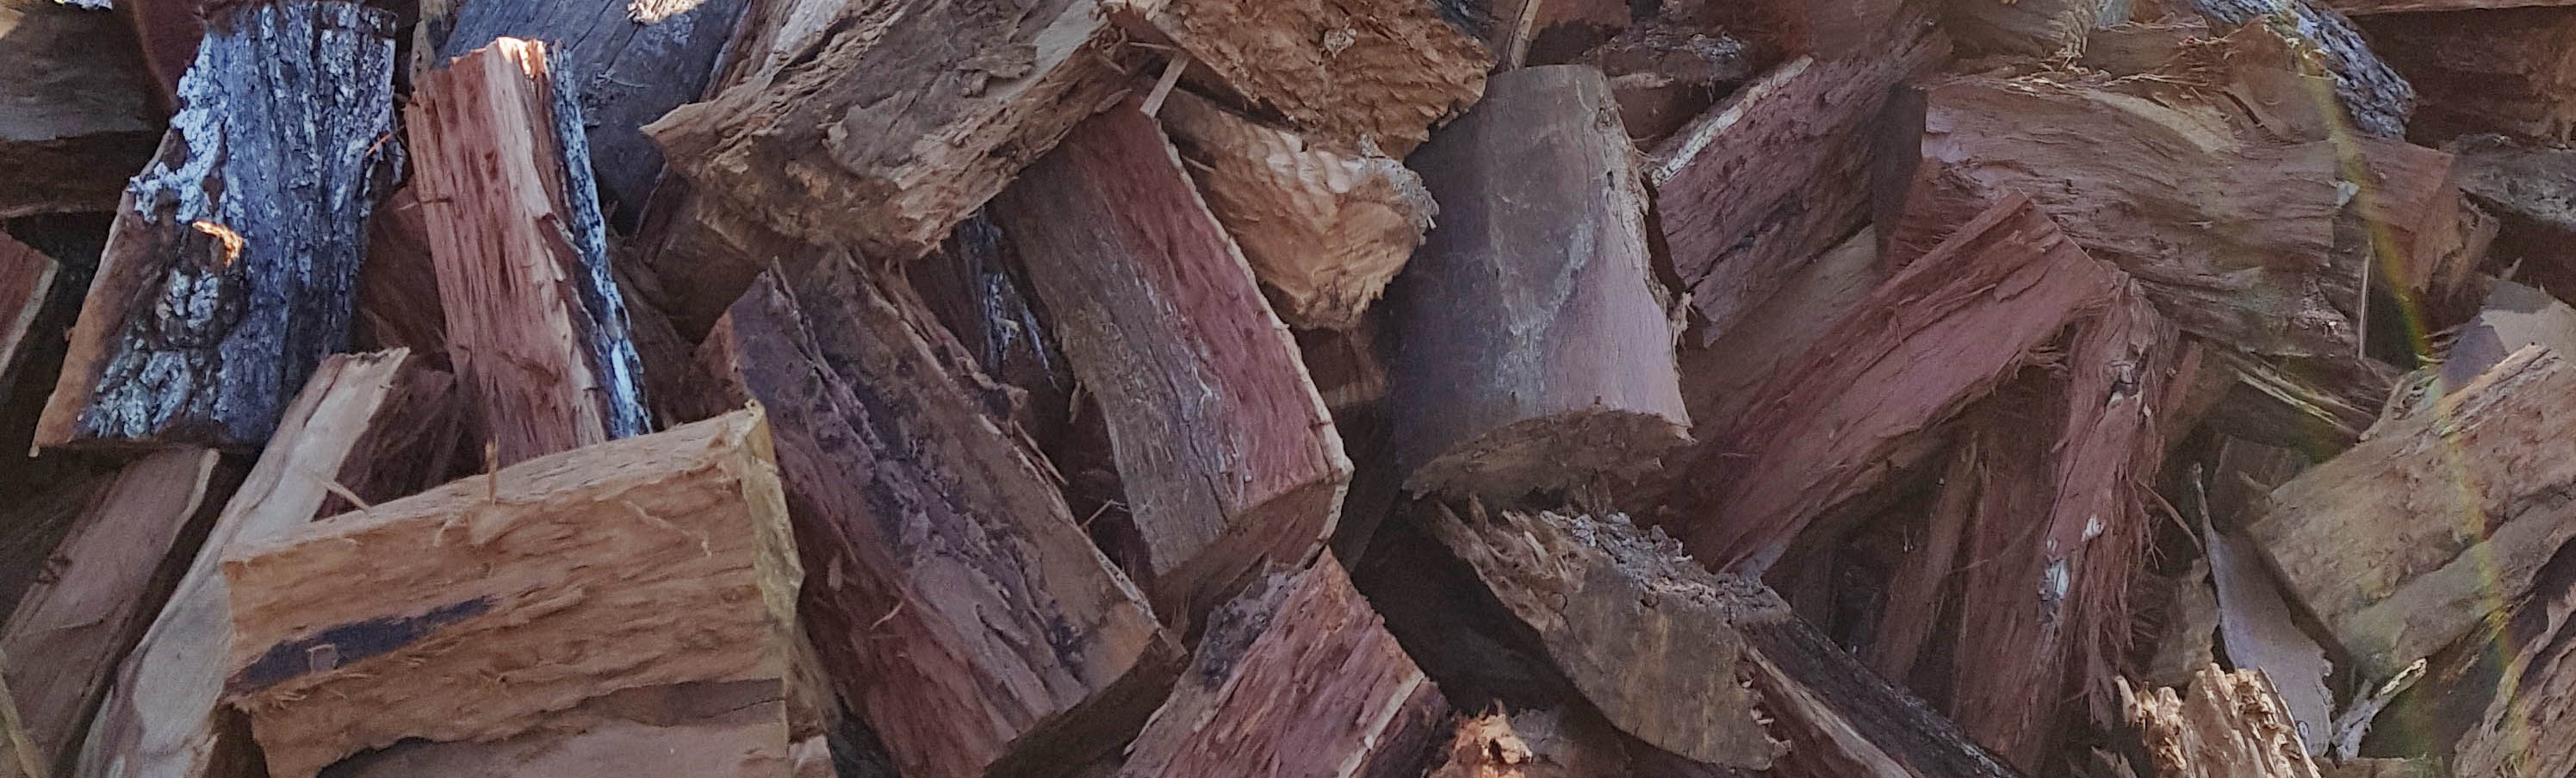 wood cropped